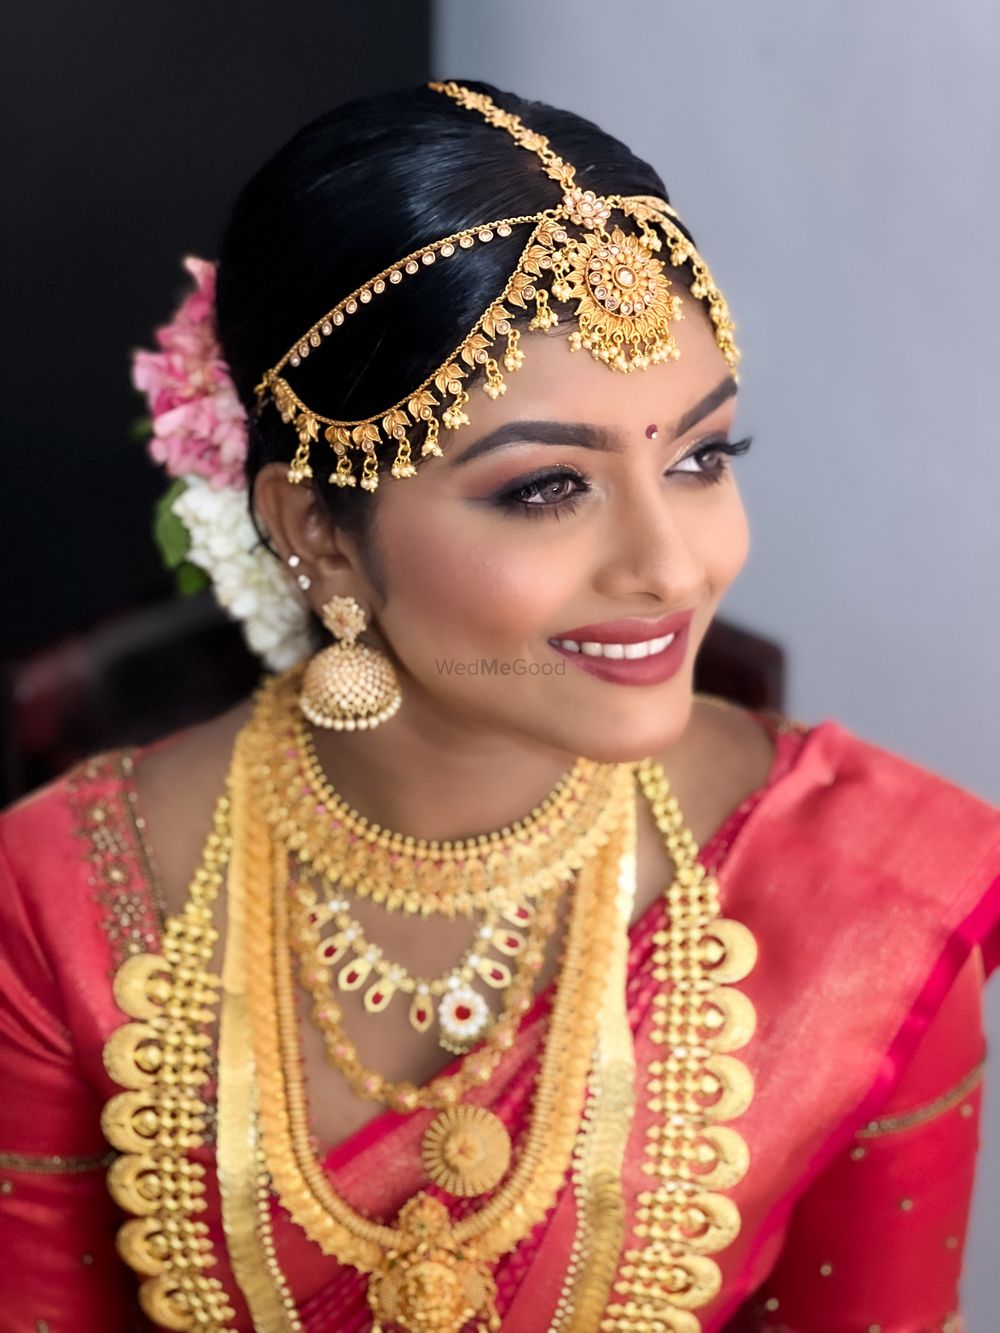 Photo From Bridal Makeover Pics - By The Mix and Brows by Fathima Jmal